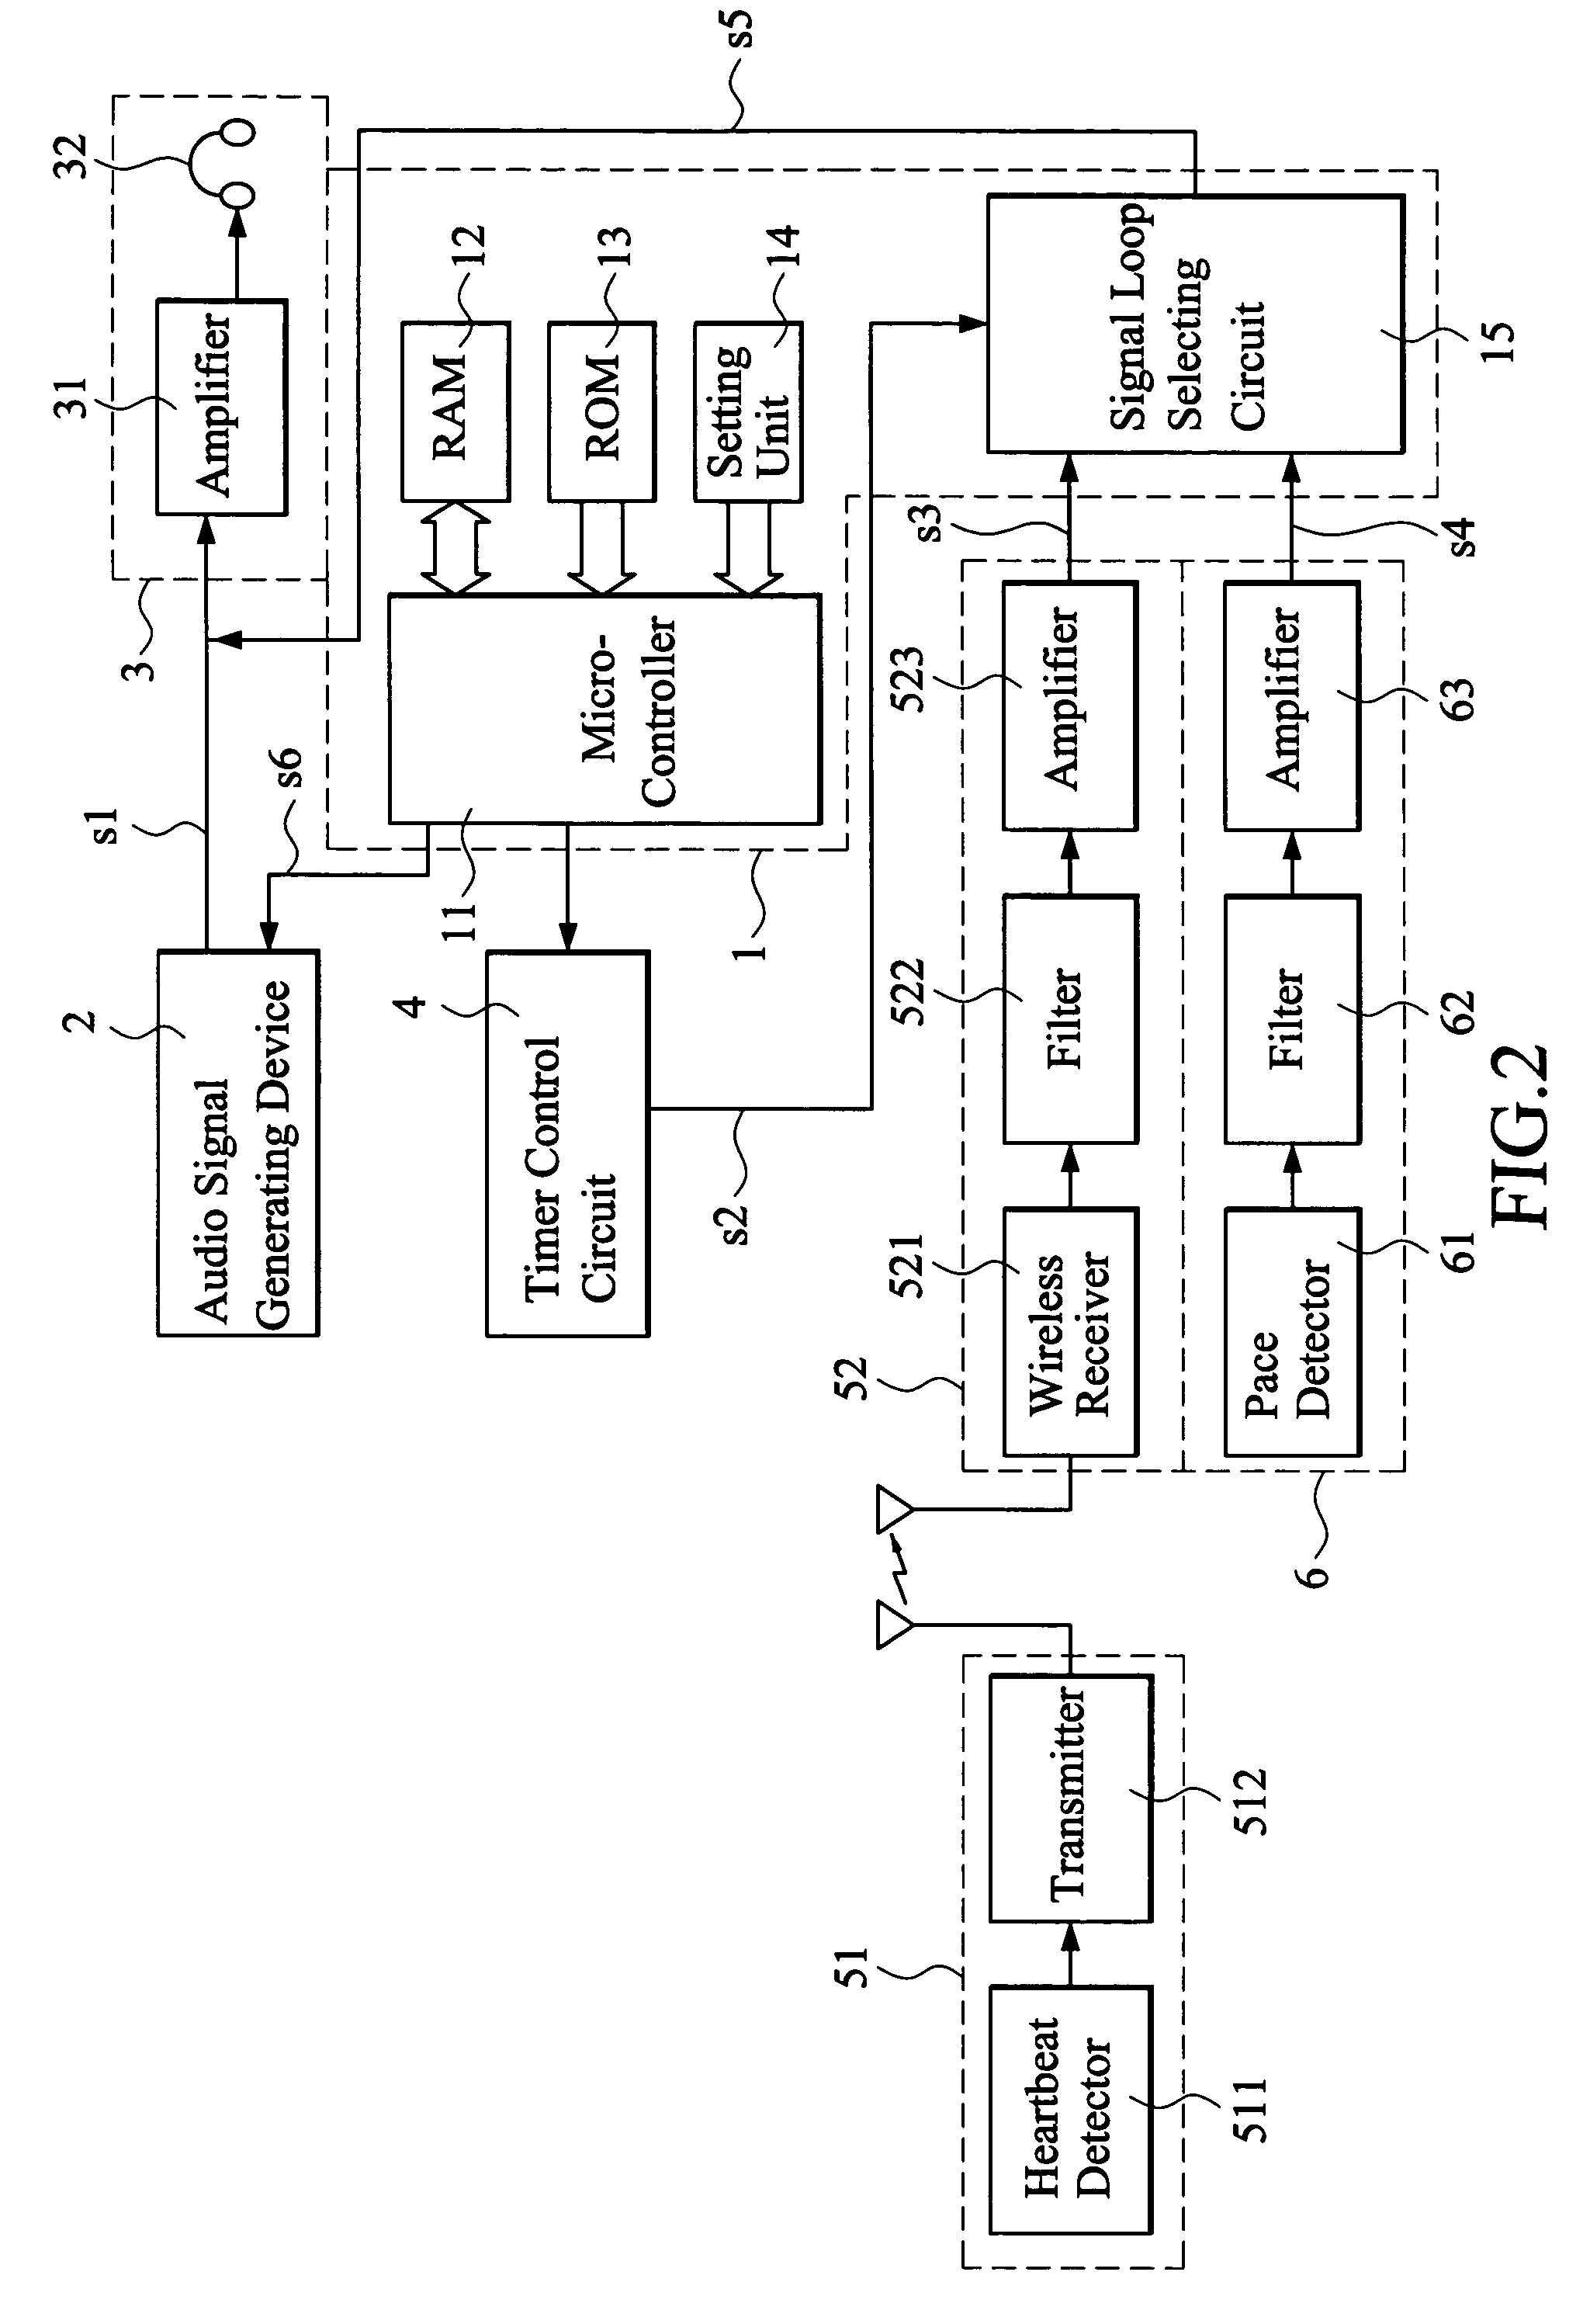 Portable audio device with body/motion signal reporting device